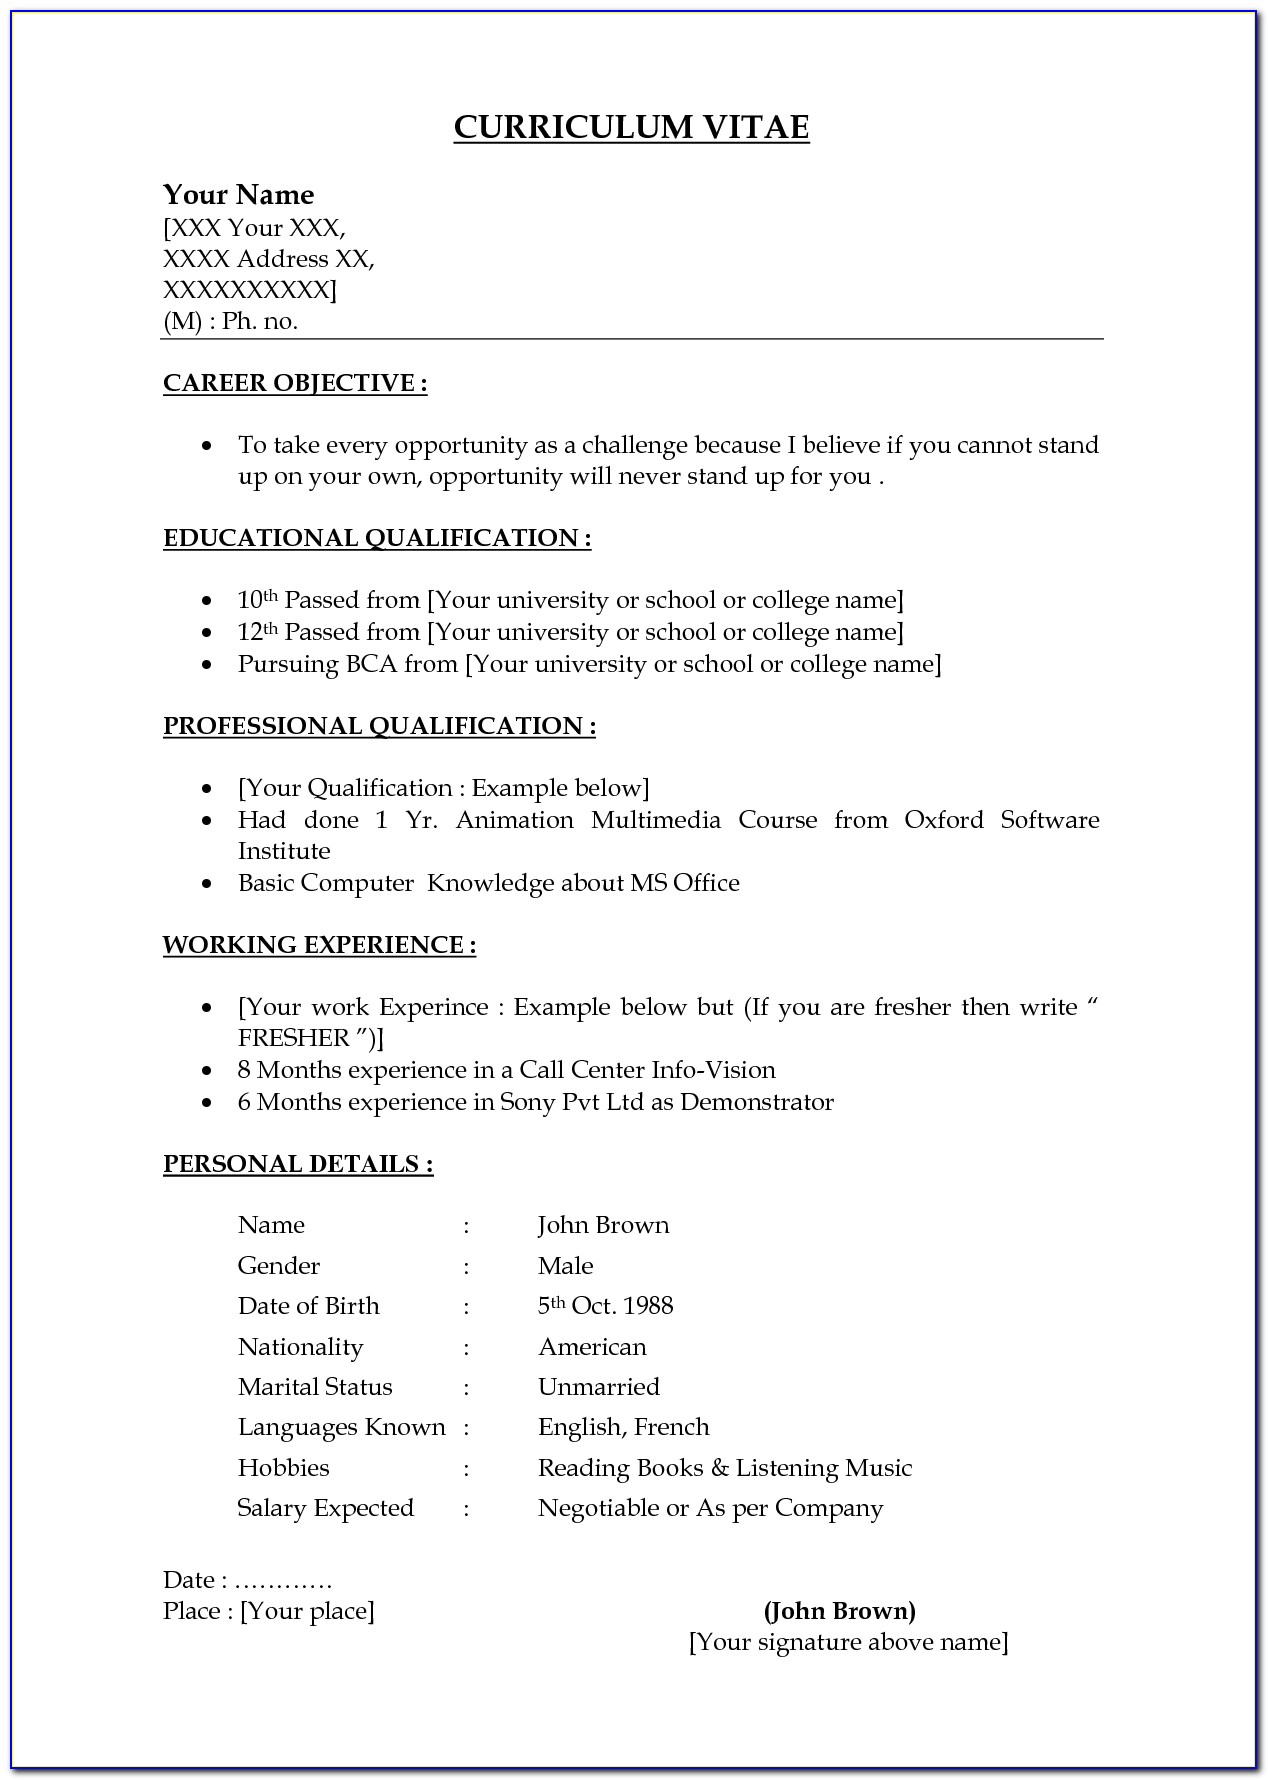 Resume Templates For Word Free Download